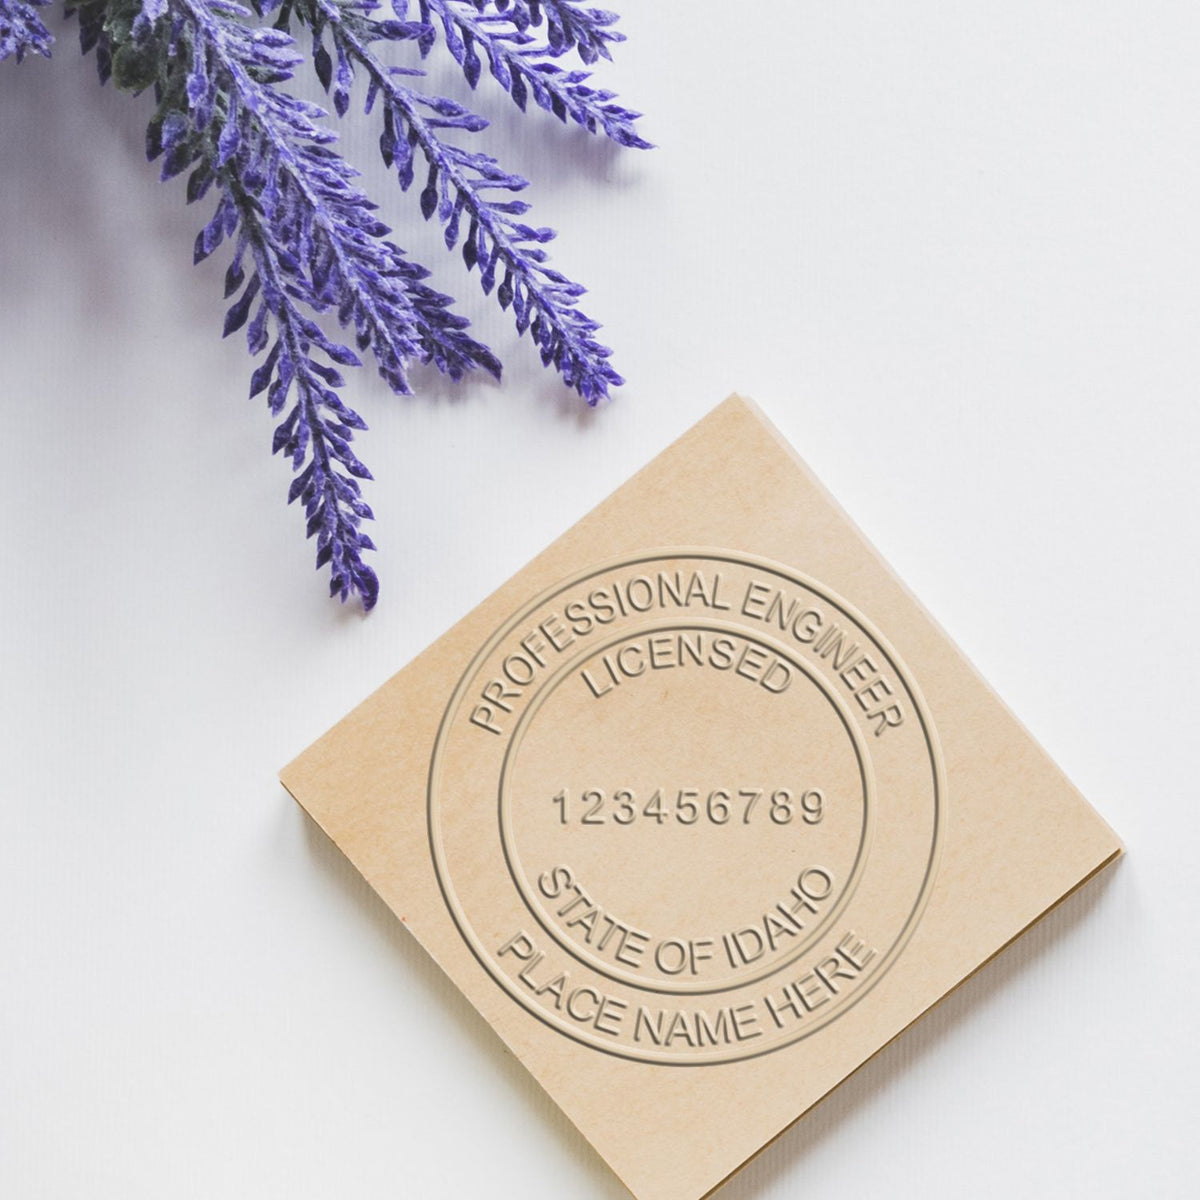 A stamped impression of the State of Idaho Extended Long Reach Engineer Seal in this stylish lifestyle photo, setting the tone for a unique and personalized product.